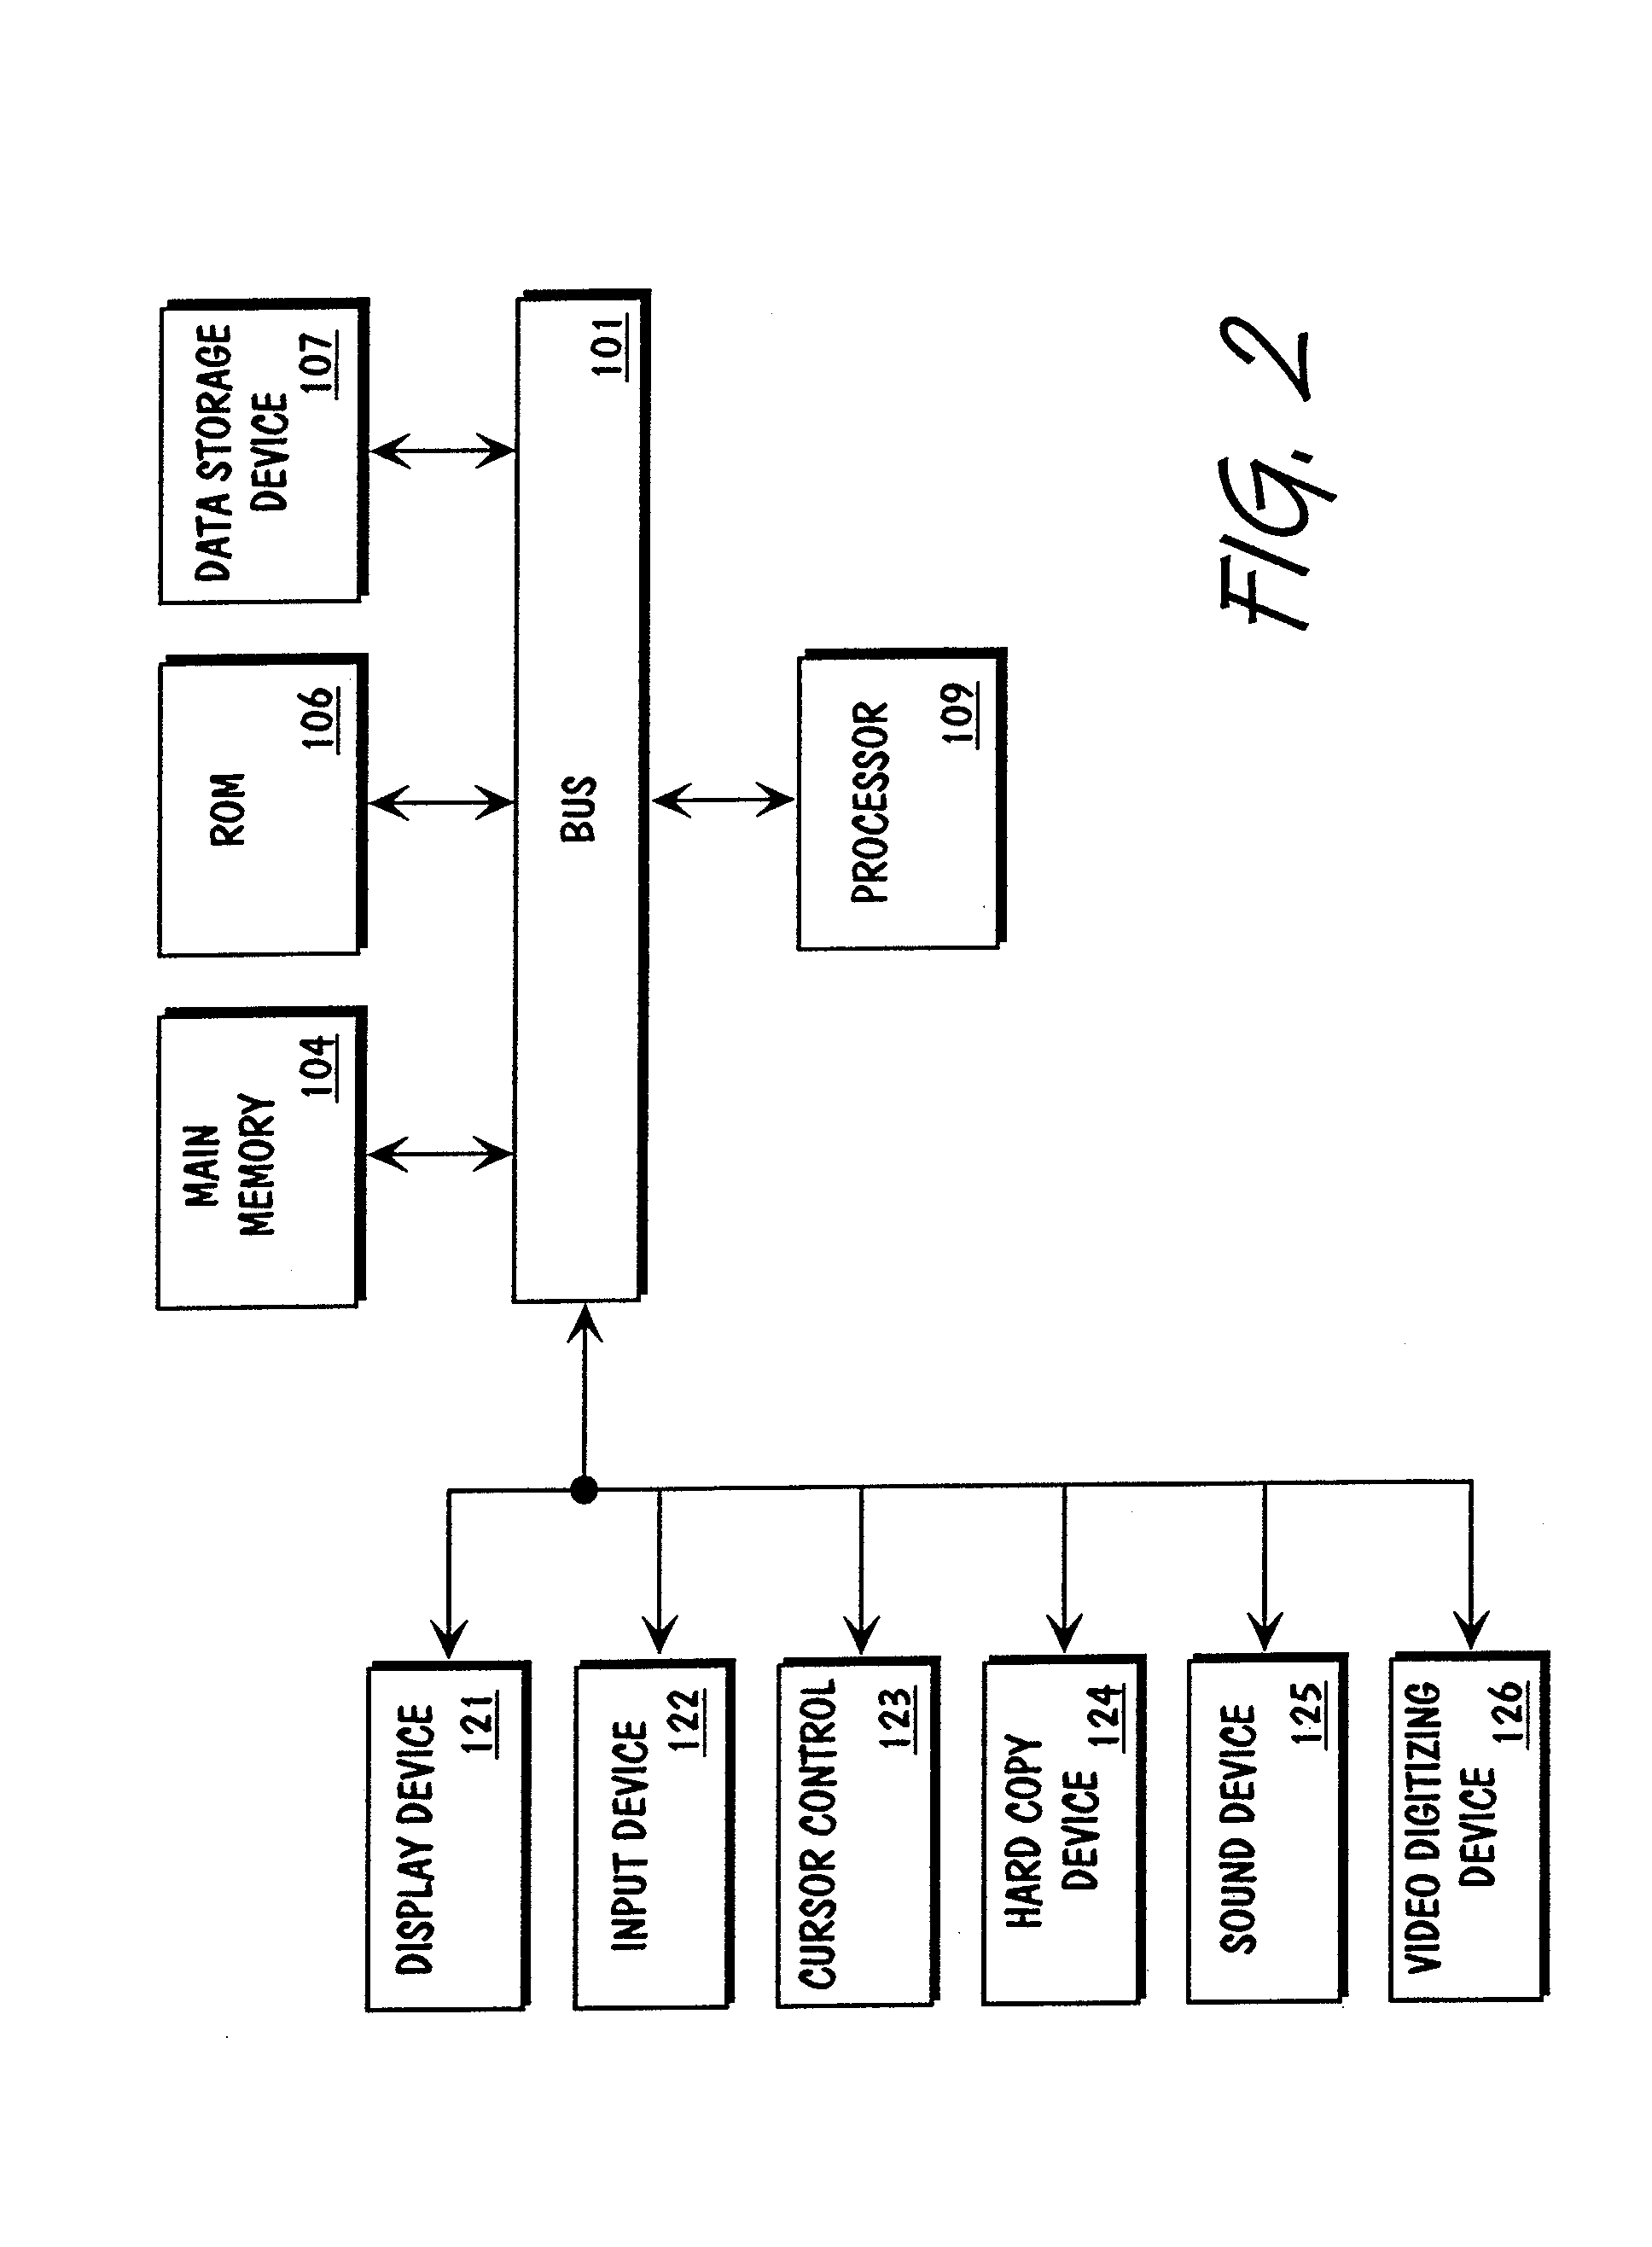 Method and apparatus for displaying network-based deal transactions